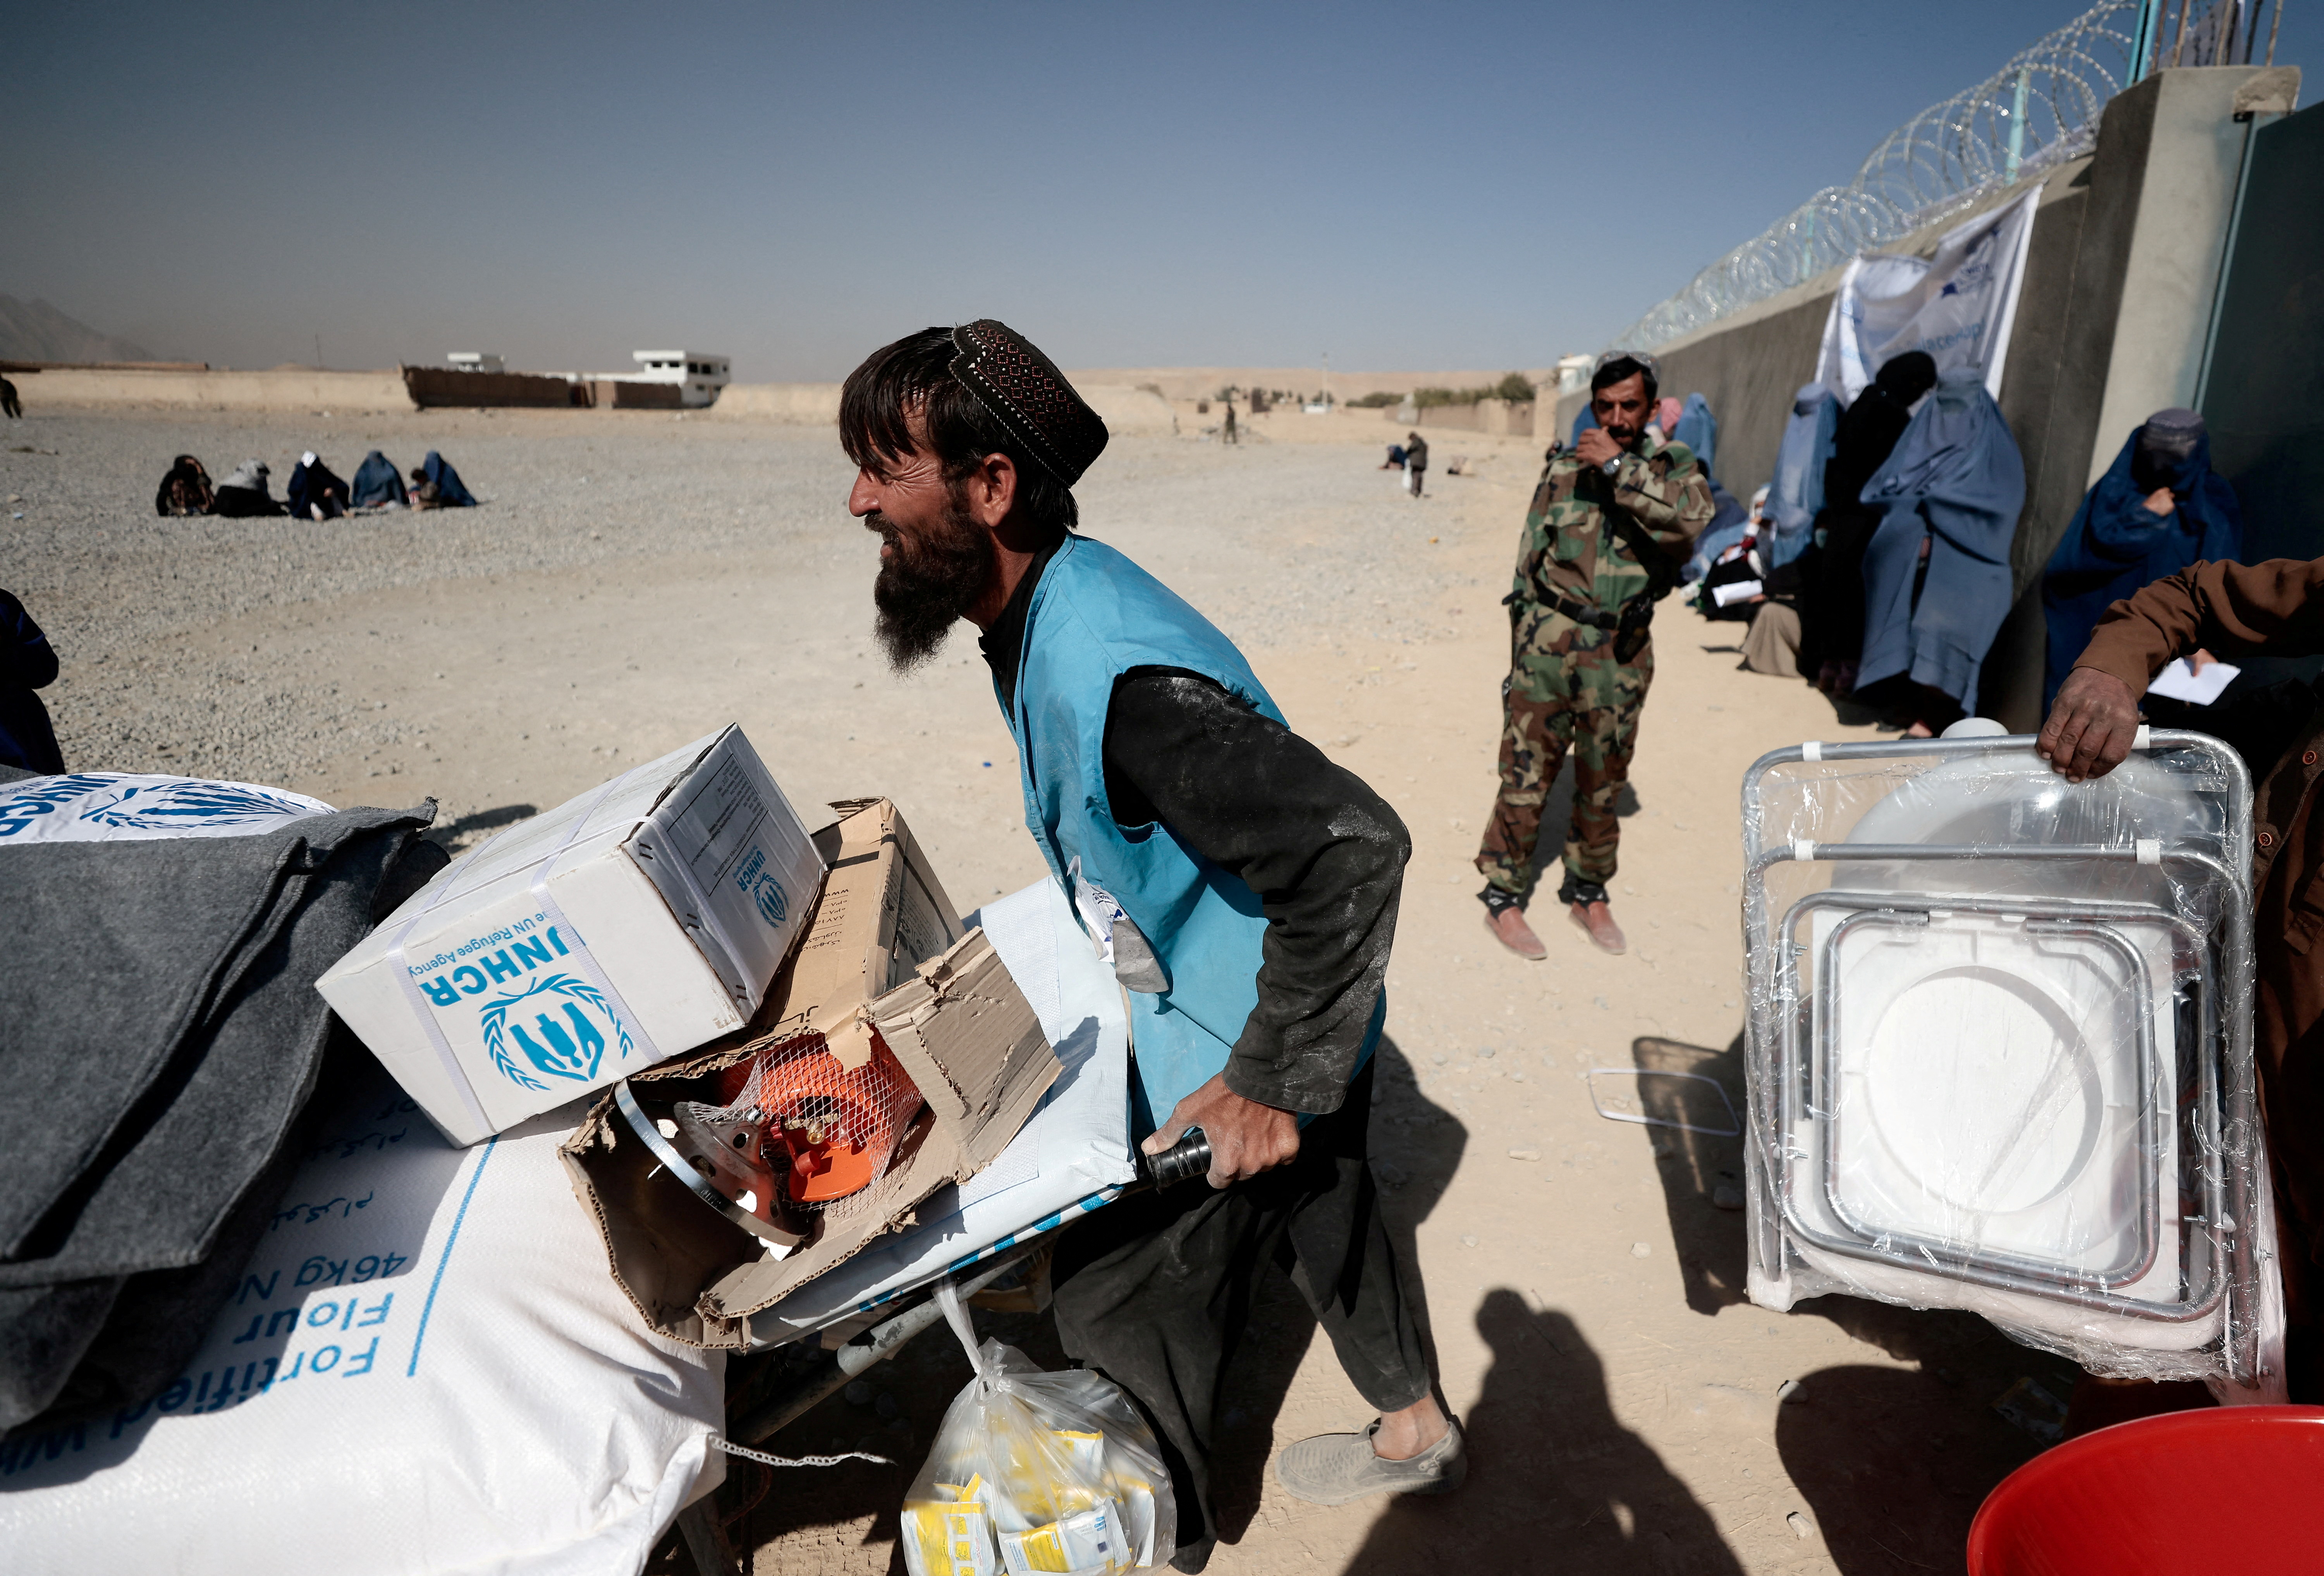 UNHCR worker pushes a wheelbarrow loaded with aid supplies for a displaced Afghan family outside a distribution center on the outskirts of Kabul